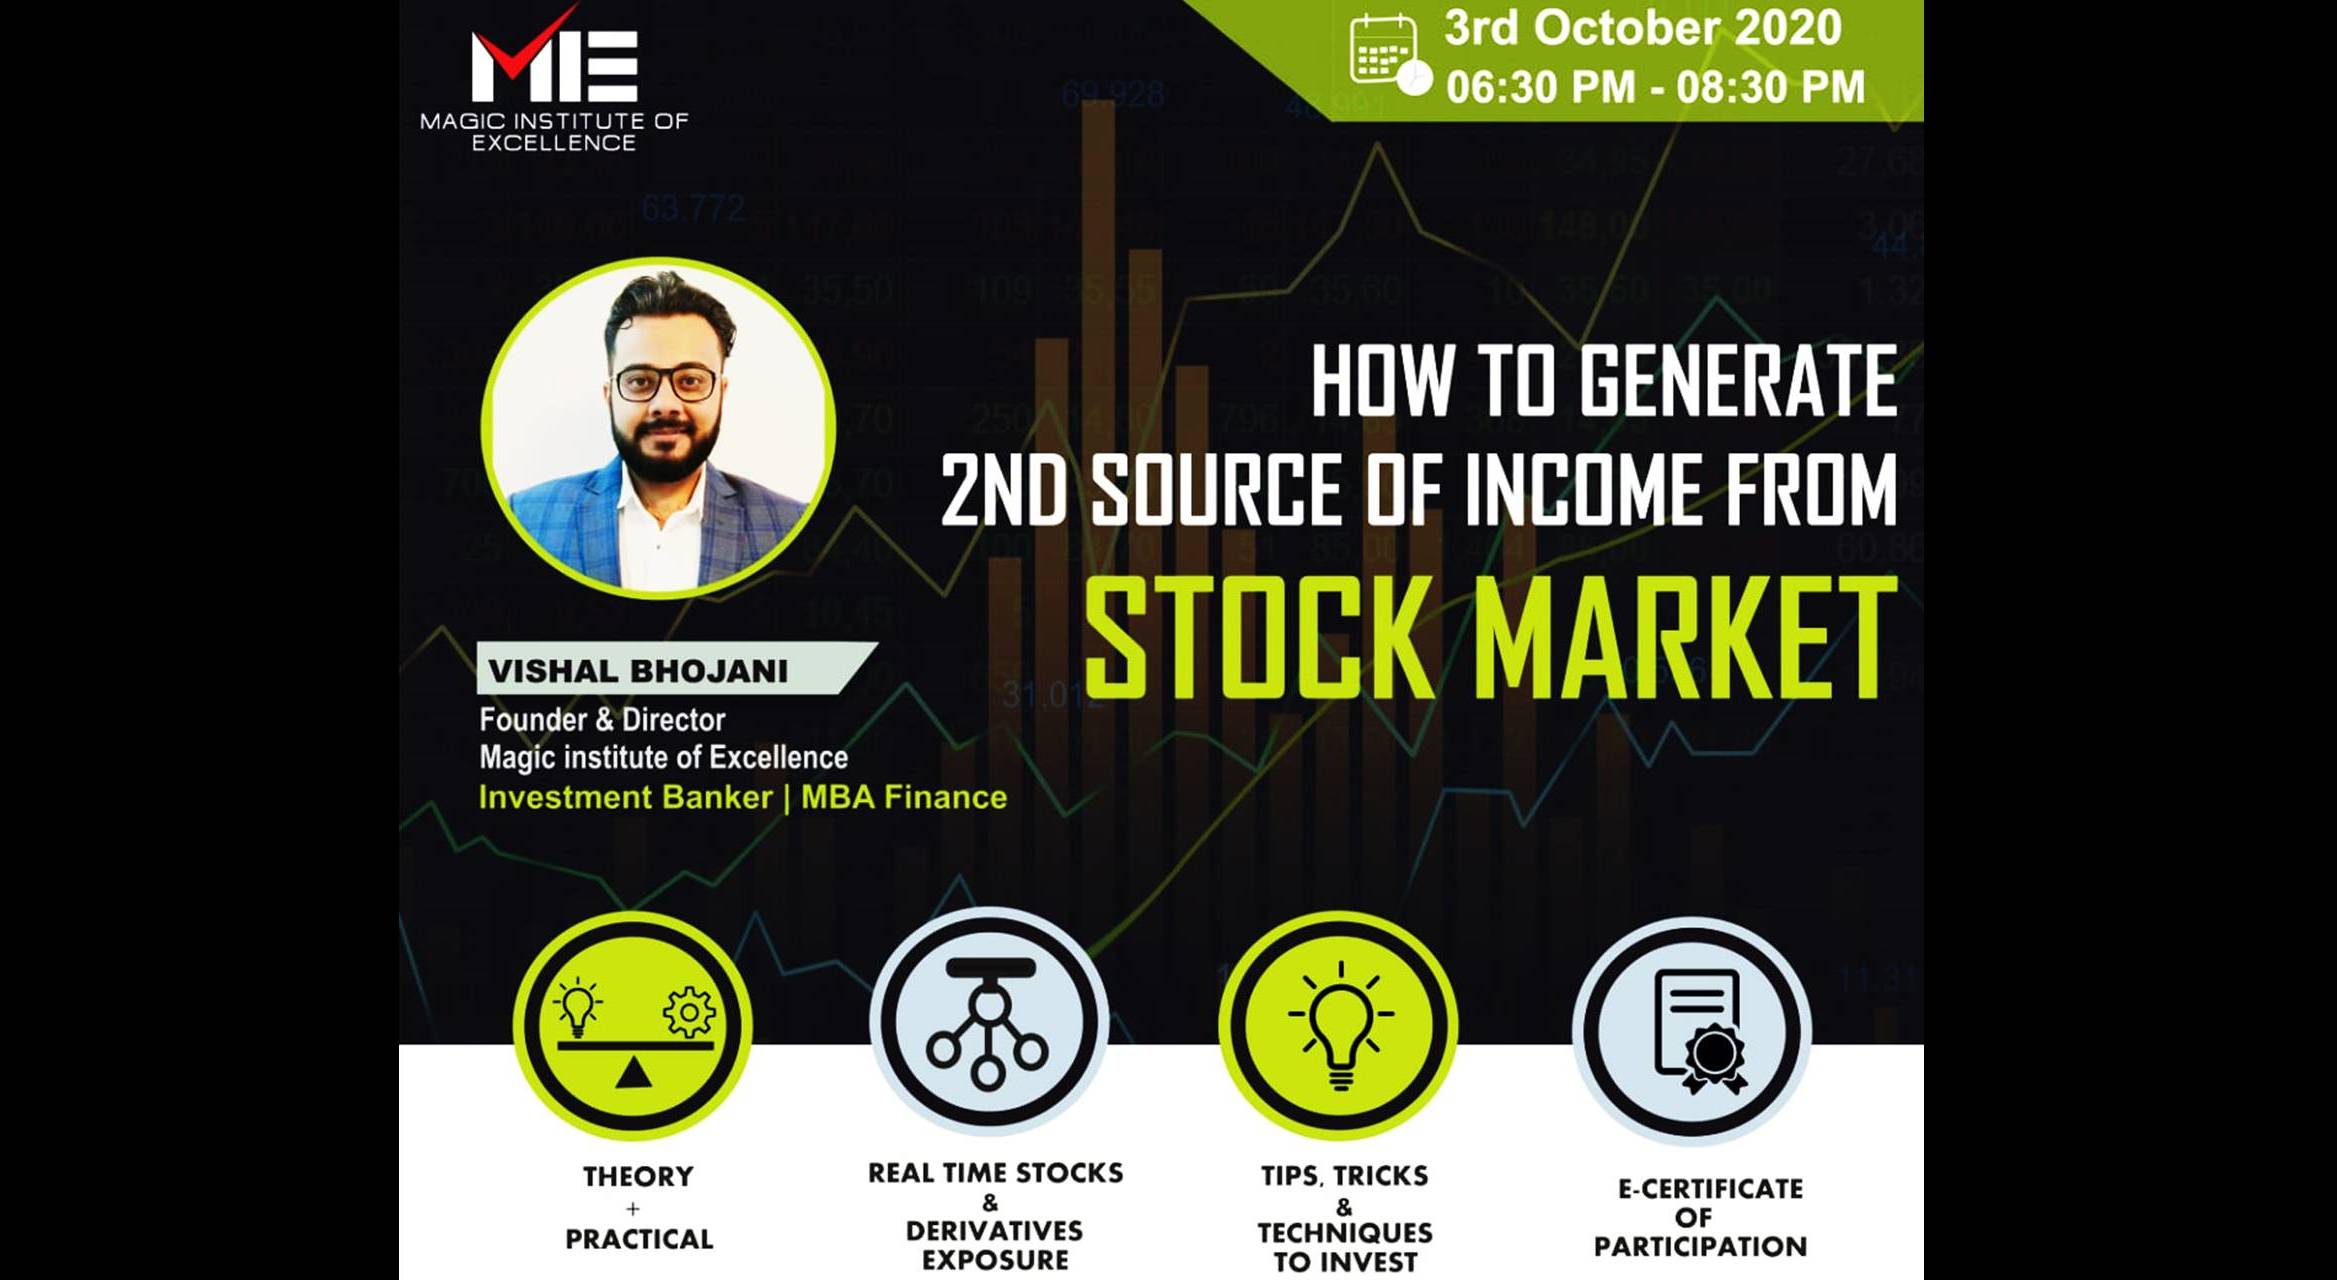 STOCK MARKET HOW TO GENERATE 2nd Source of